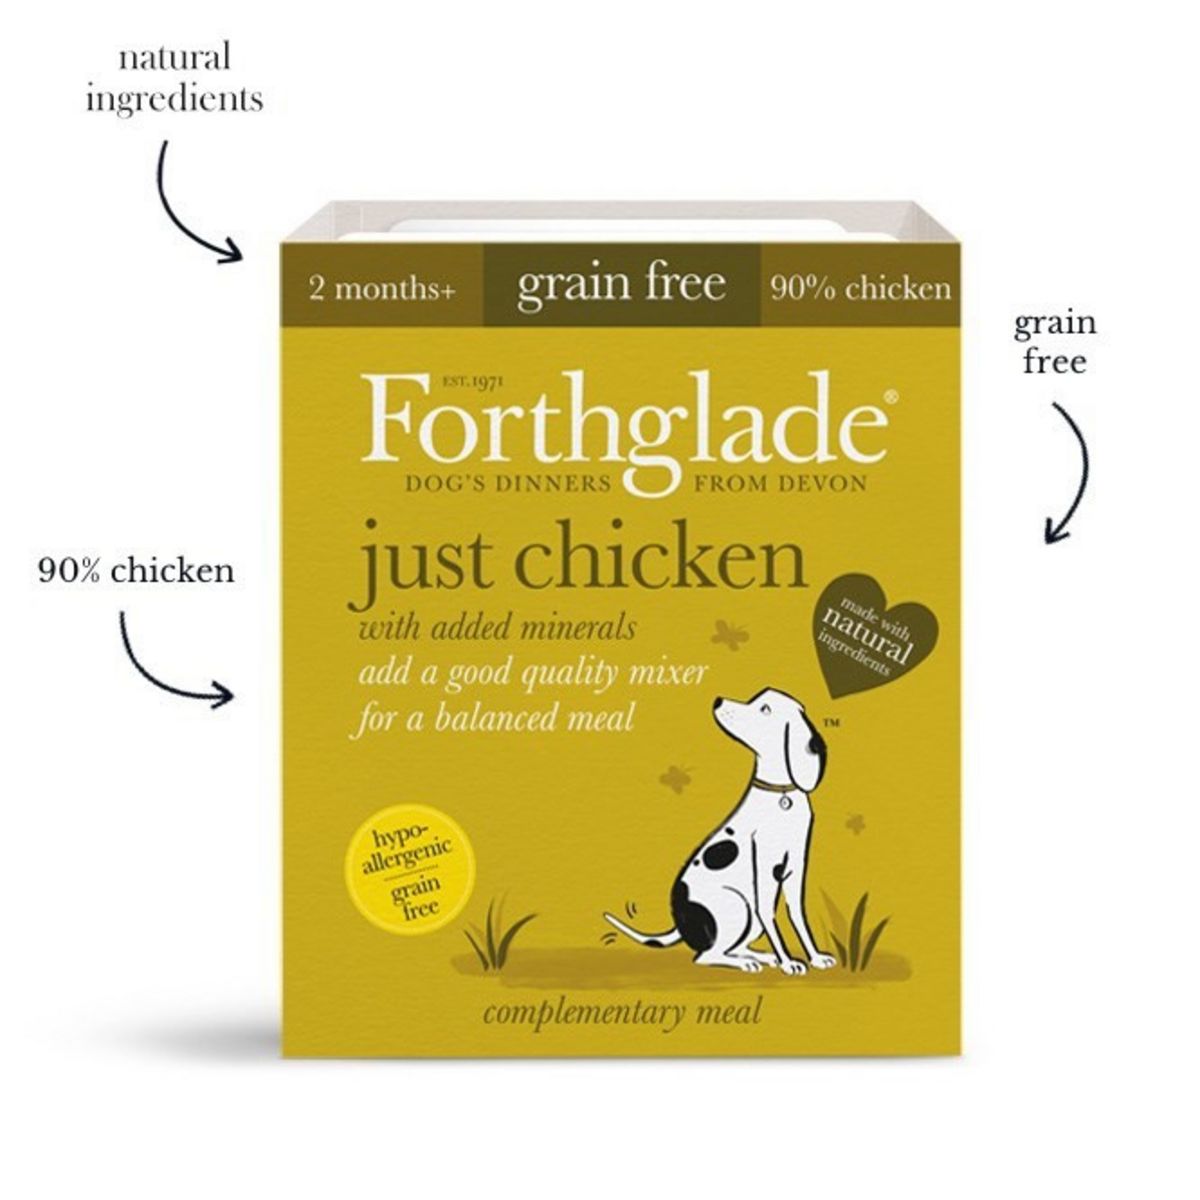 Forthglade Just Chicken - Wet Food - For Dogs